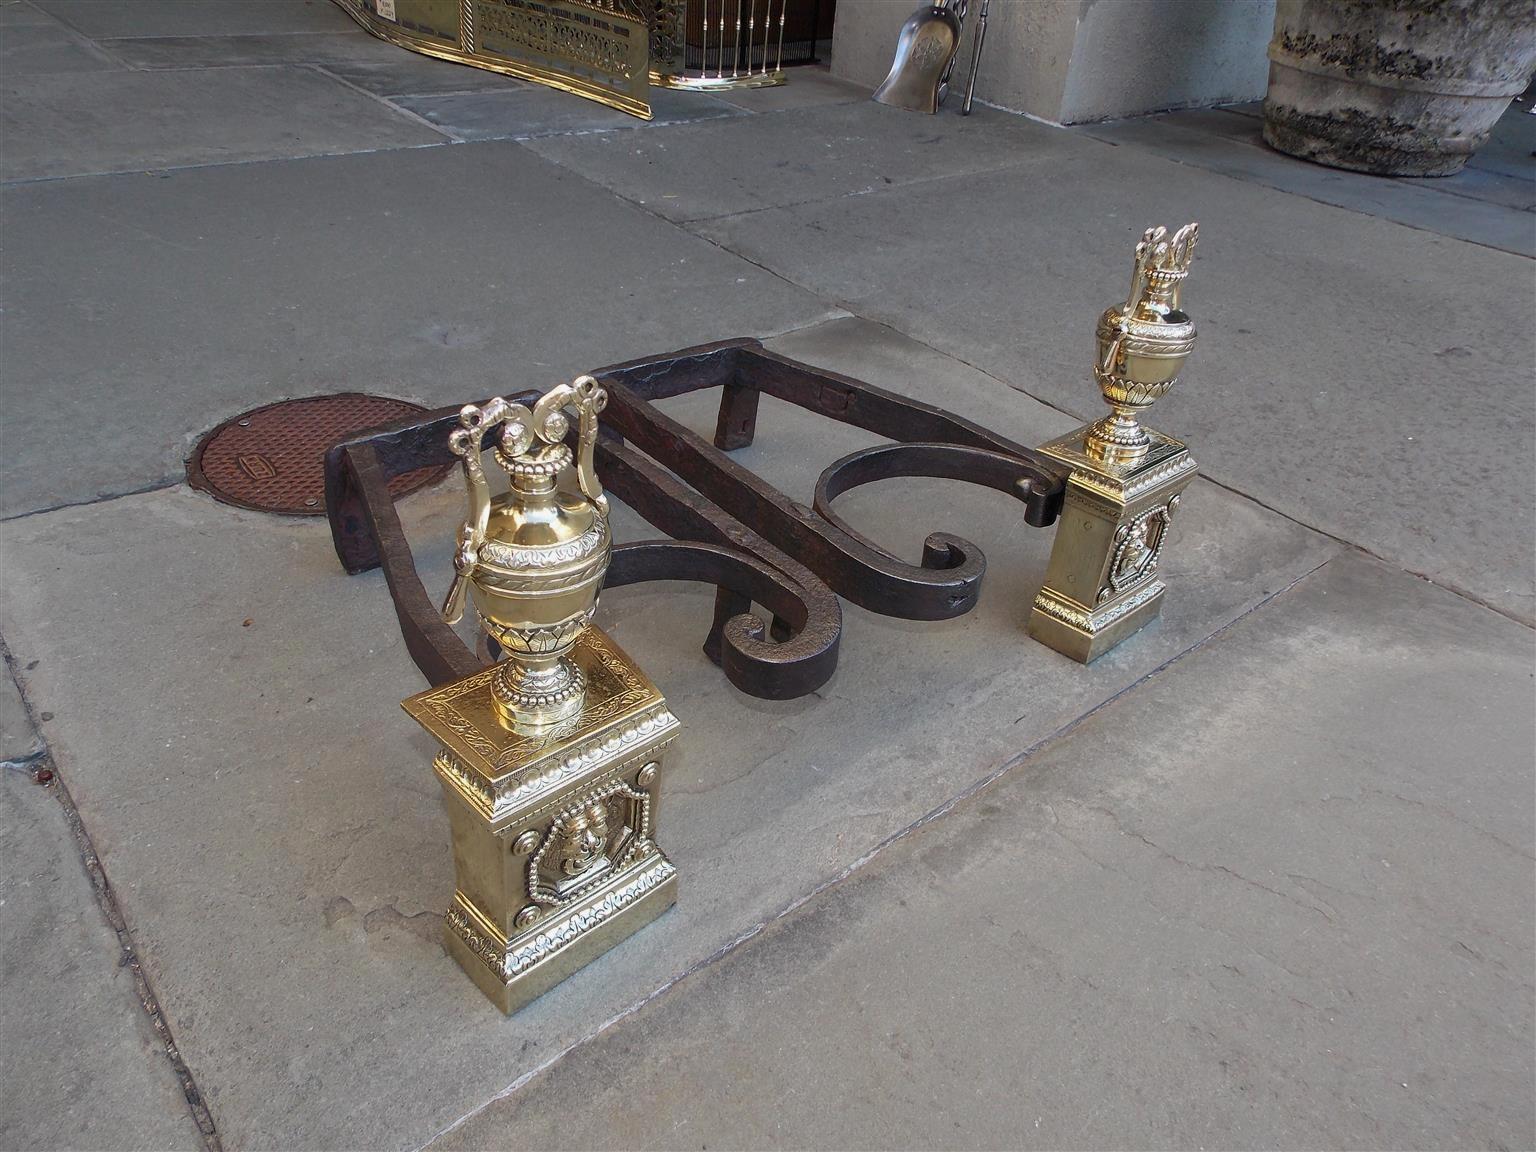 Pair of French brass and wrought iron andirons with flanking ribbon and foliage urns, hand chased floral beading, squared plinths with figural lions head, circular corner medallions, and resting on step back floral base. Andirons retain the original